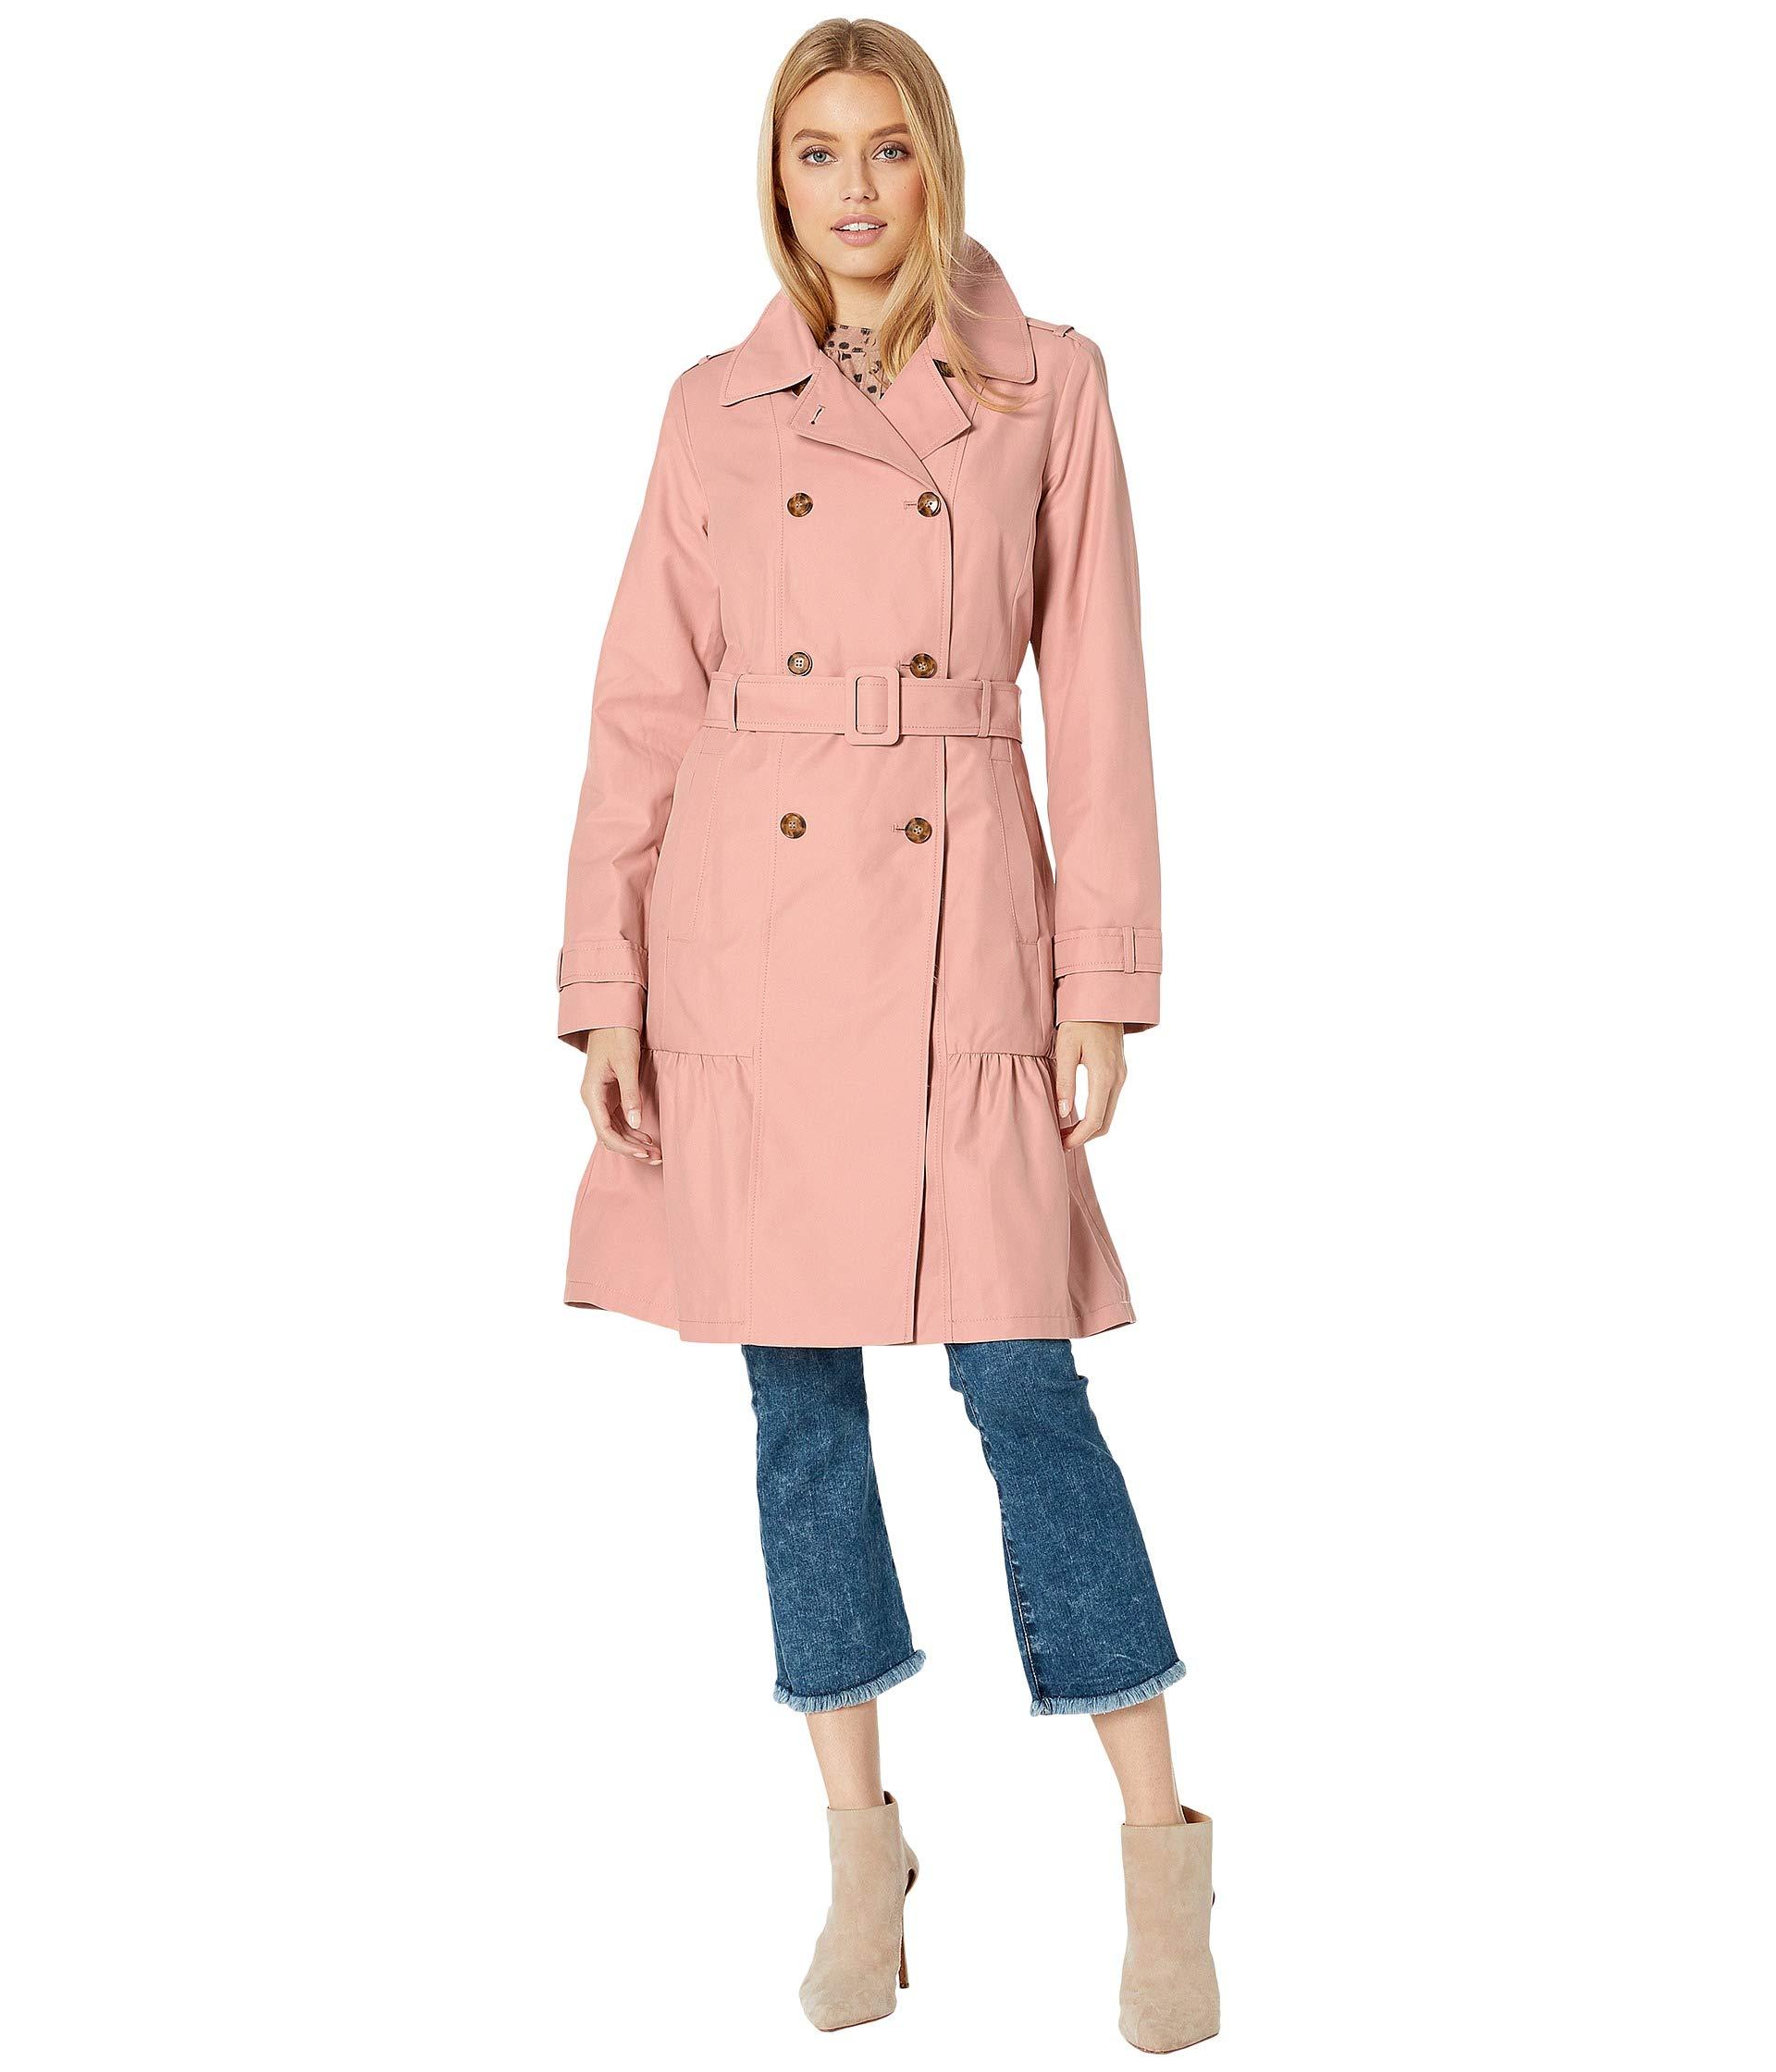 Kate Spade Cotton Blend Trench Coat With Waist Tie in Pink - Lyst